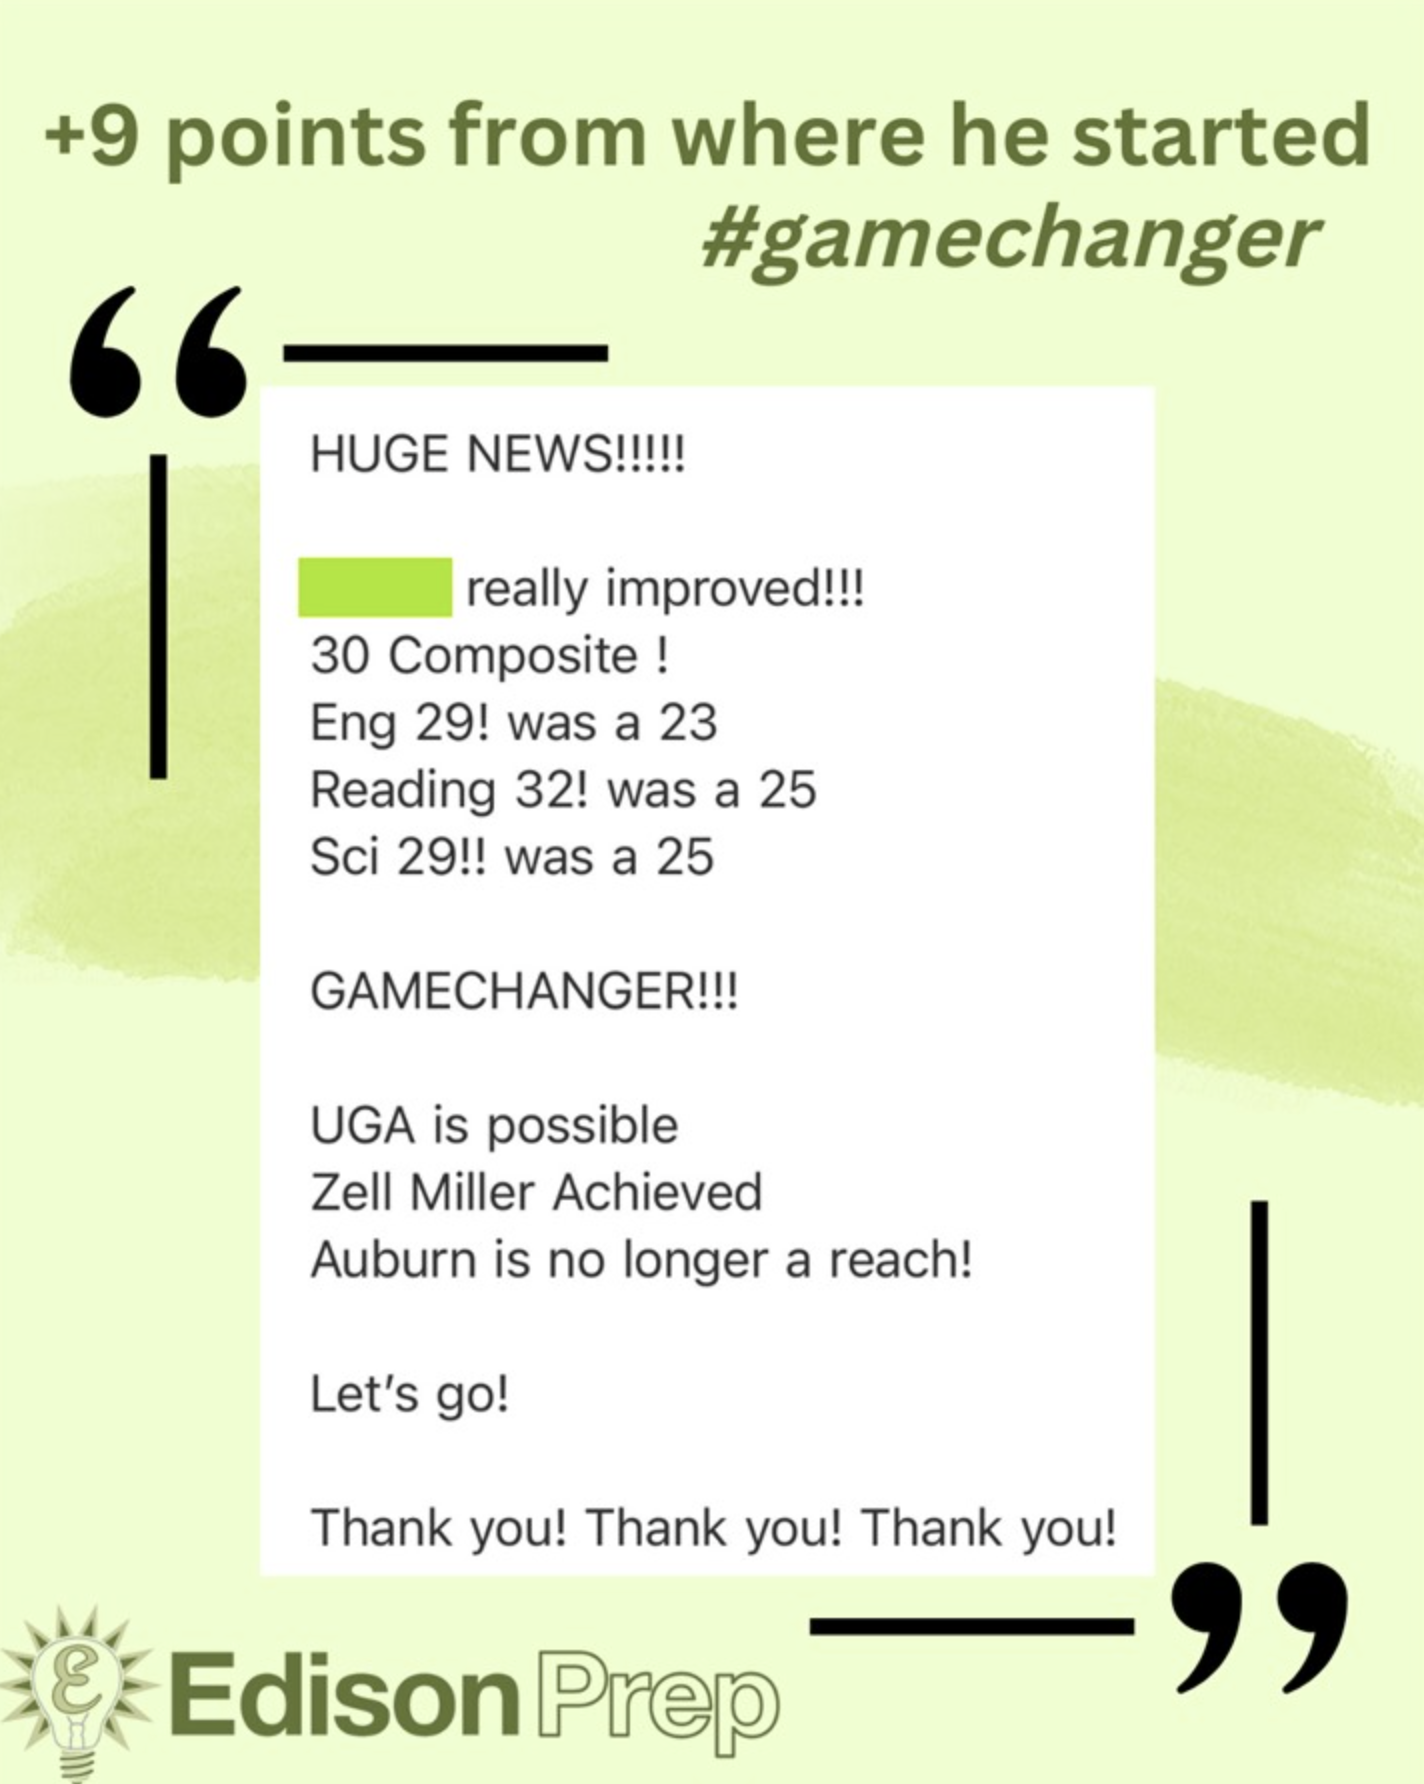 An excited testimonial within a graphic, celebrating a student's ACT score increase of 9 points, now reaching a composite score of 30. Improvements are highlighted in English, Reading, and Science, with the student achieving a score of 29 in English and Science, up from 23, and a 32 in Reading, up from 25. The text exclaims 'GAMECHANGER!!!' and mentions the possibility of attending UGA, achieving the Zell Miller scholarship, and Auburn being within reach. The message concludes with energetic cheers and multiple thank yous. The hashtag #gamechanger adds to the celebratory tone.